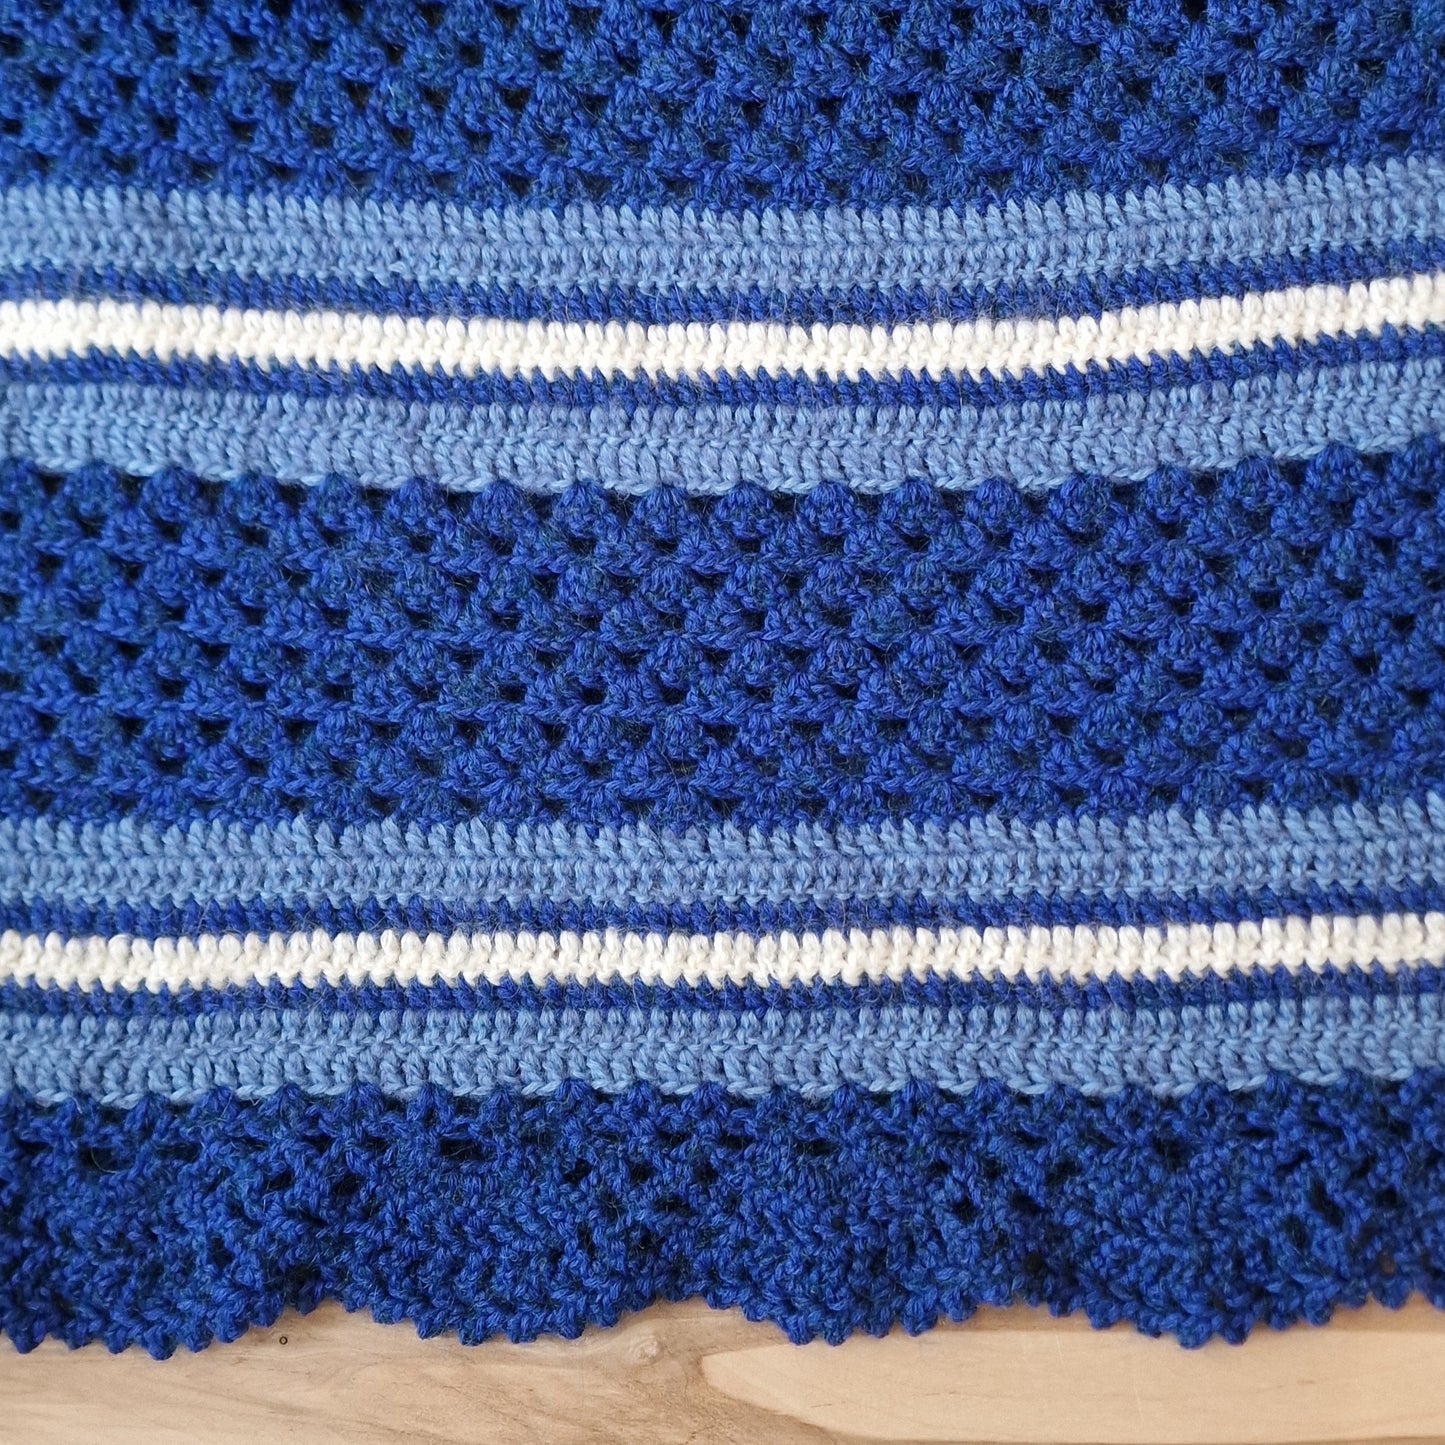 Blue and white large crochet scarf (DZTO 21)